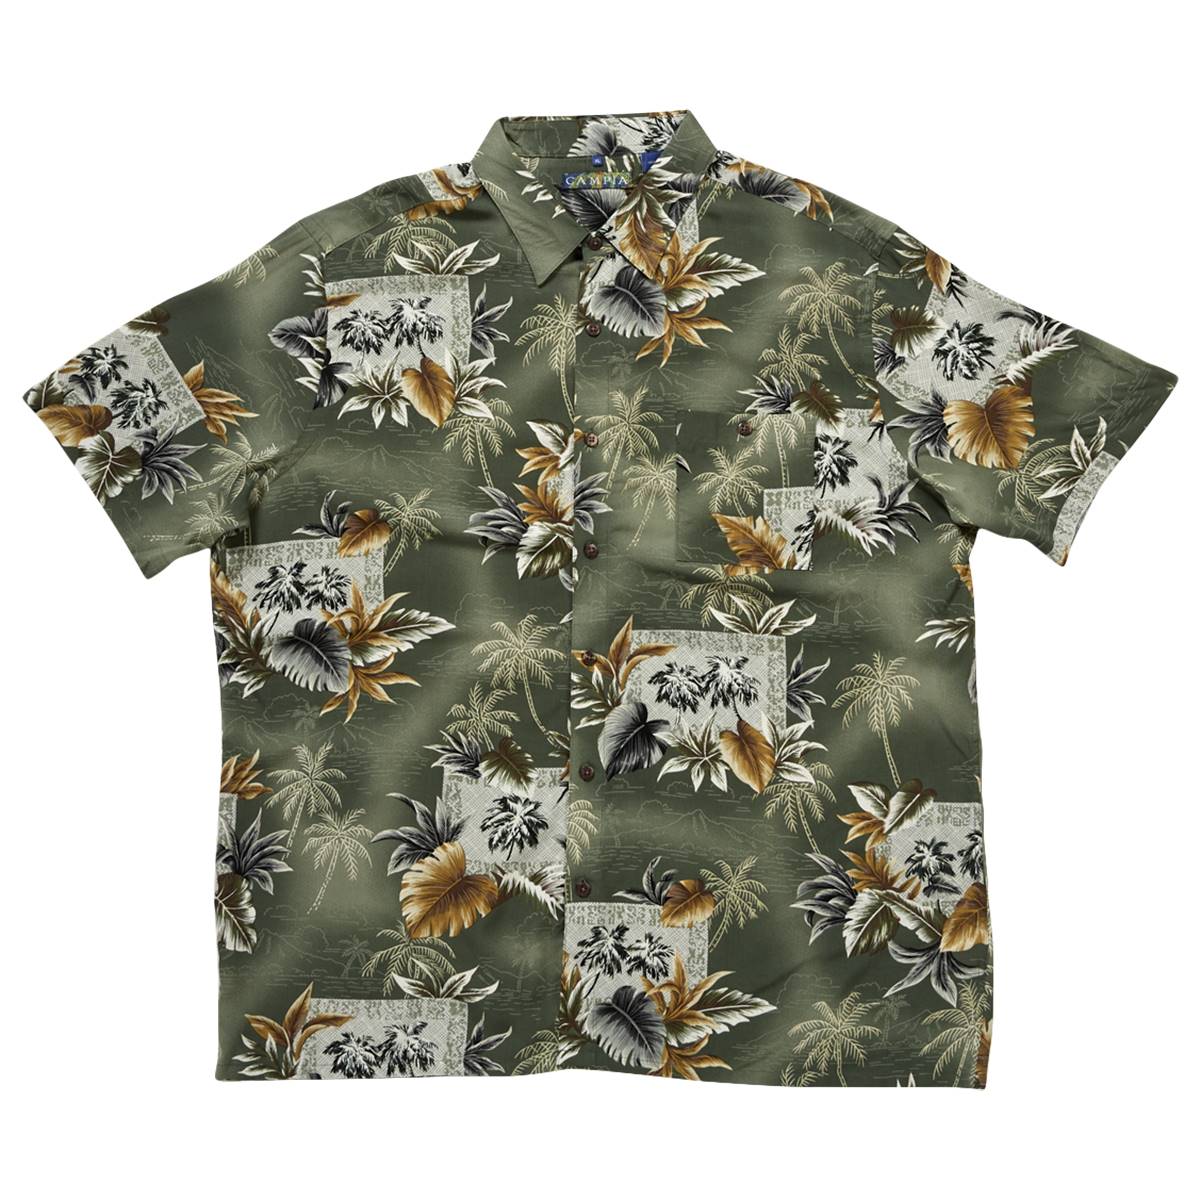 Mens Campia Palm Tree & Leaf Button Down Shirt - Olive